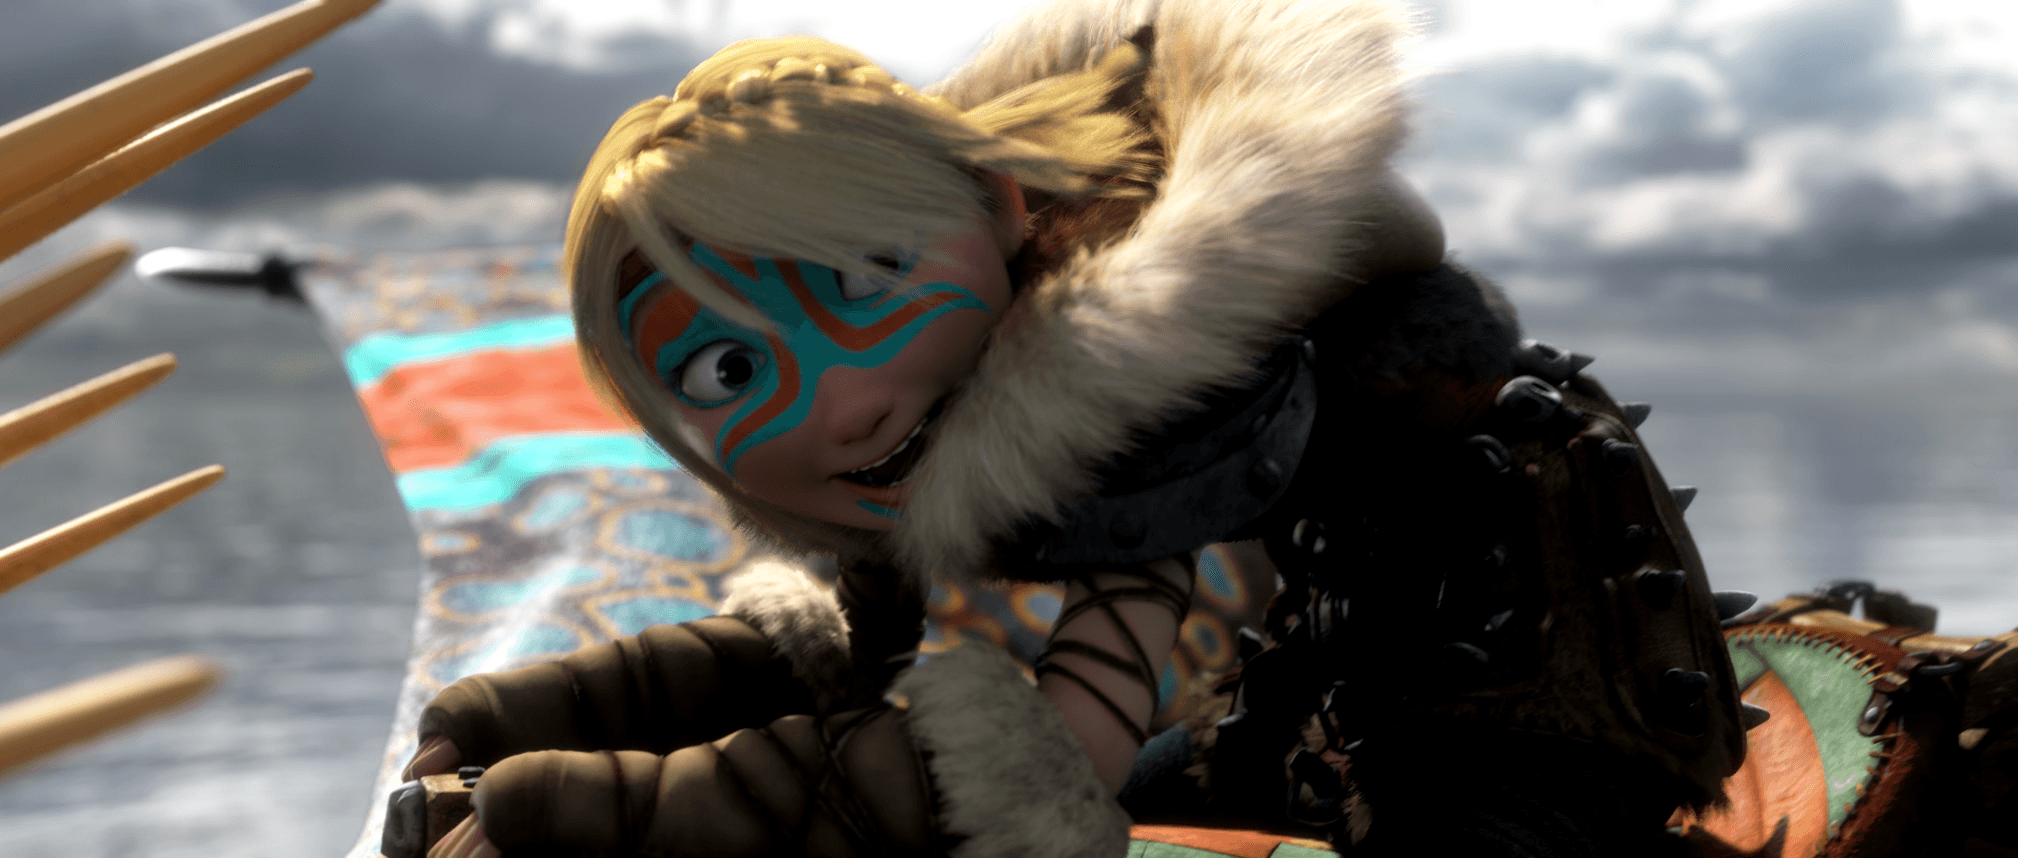 how to train your dragon 2 wallpaper astrid